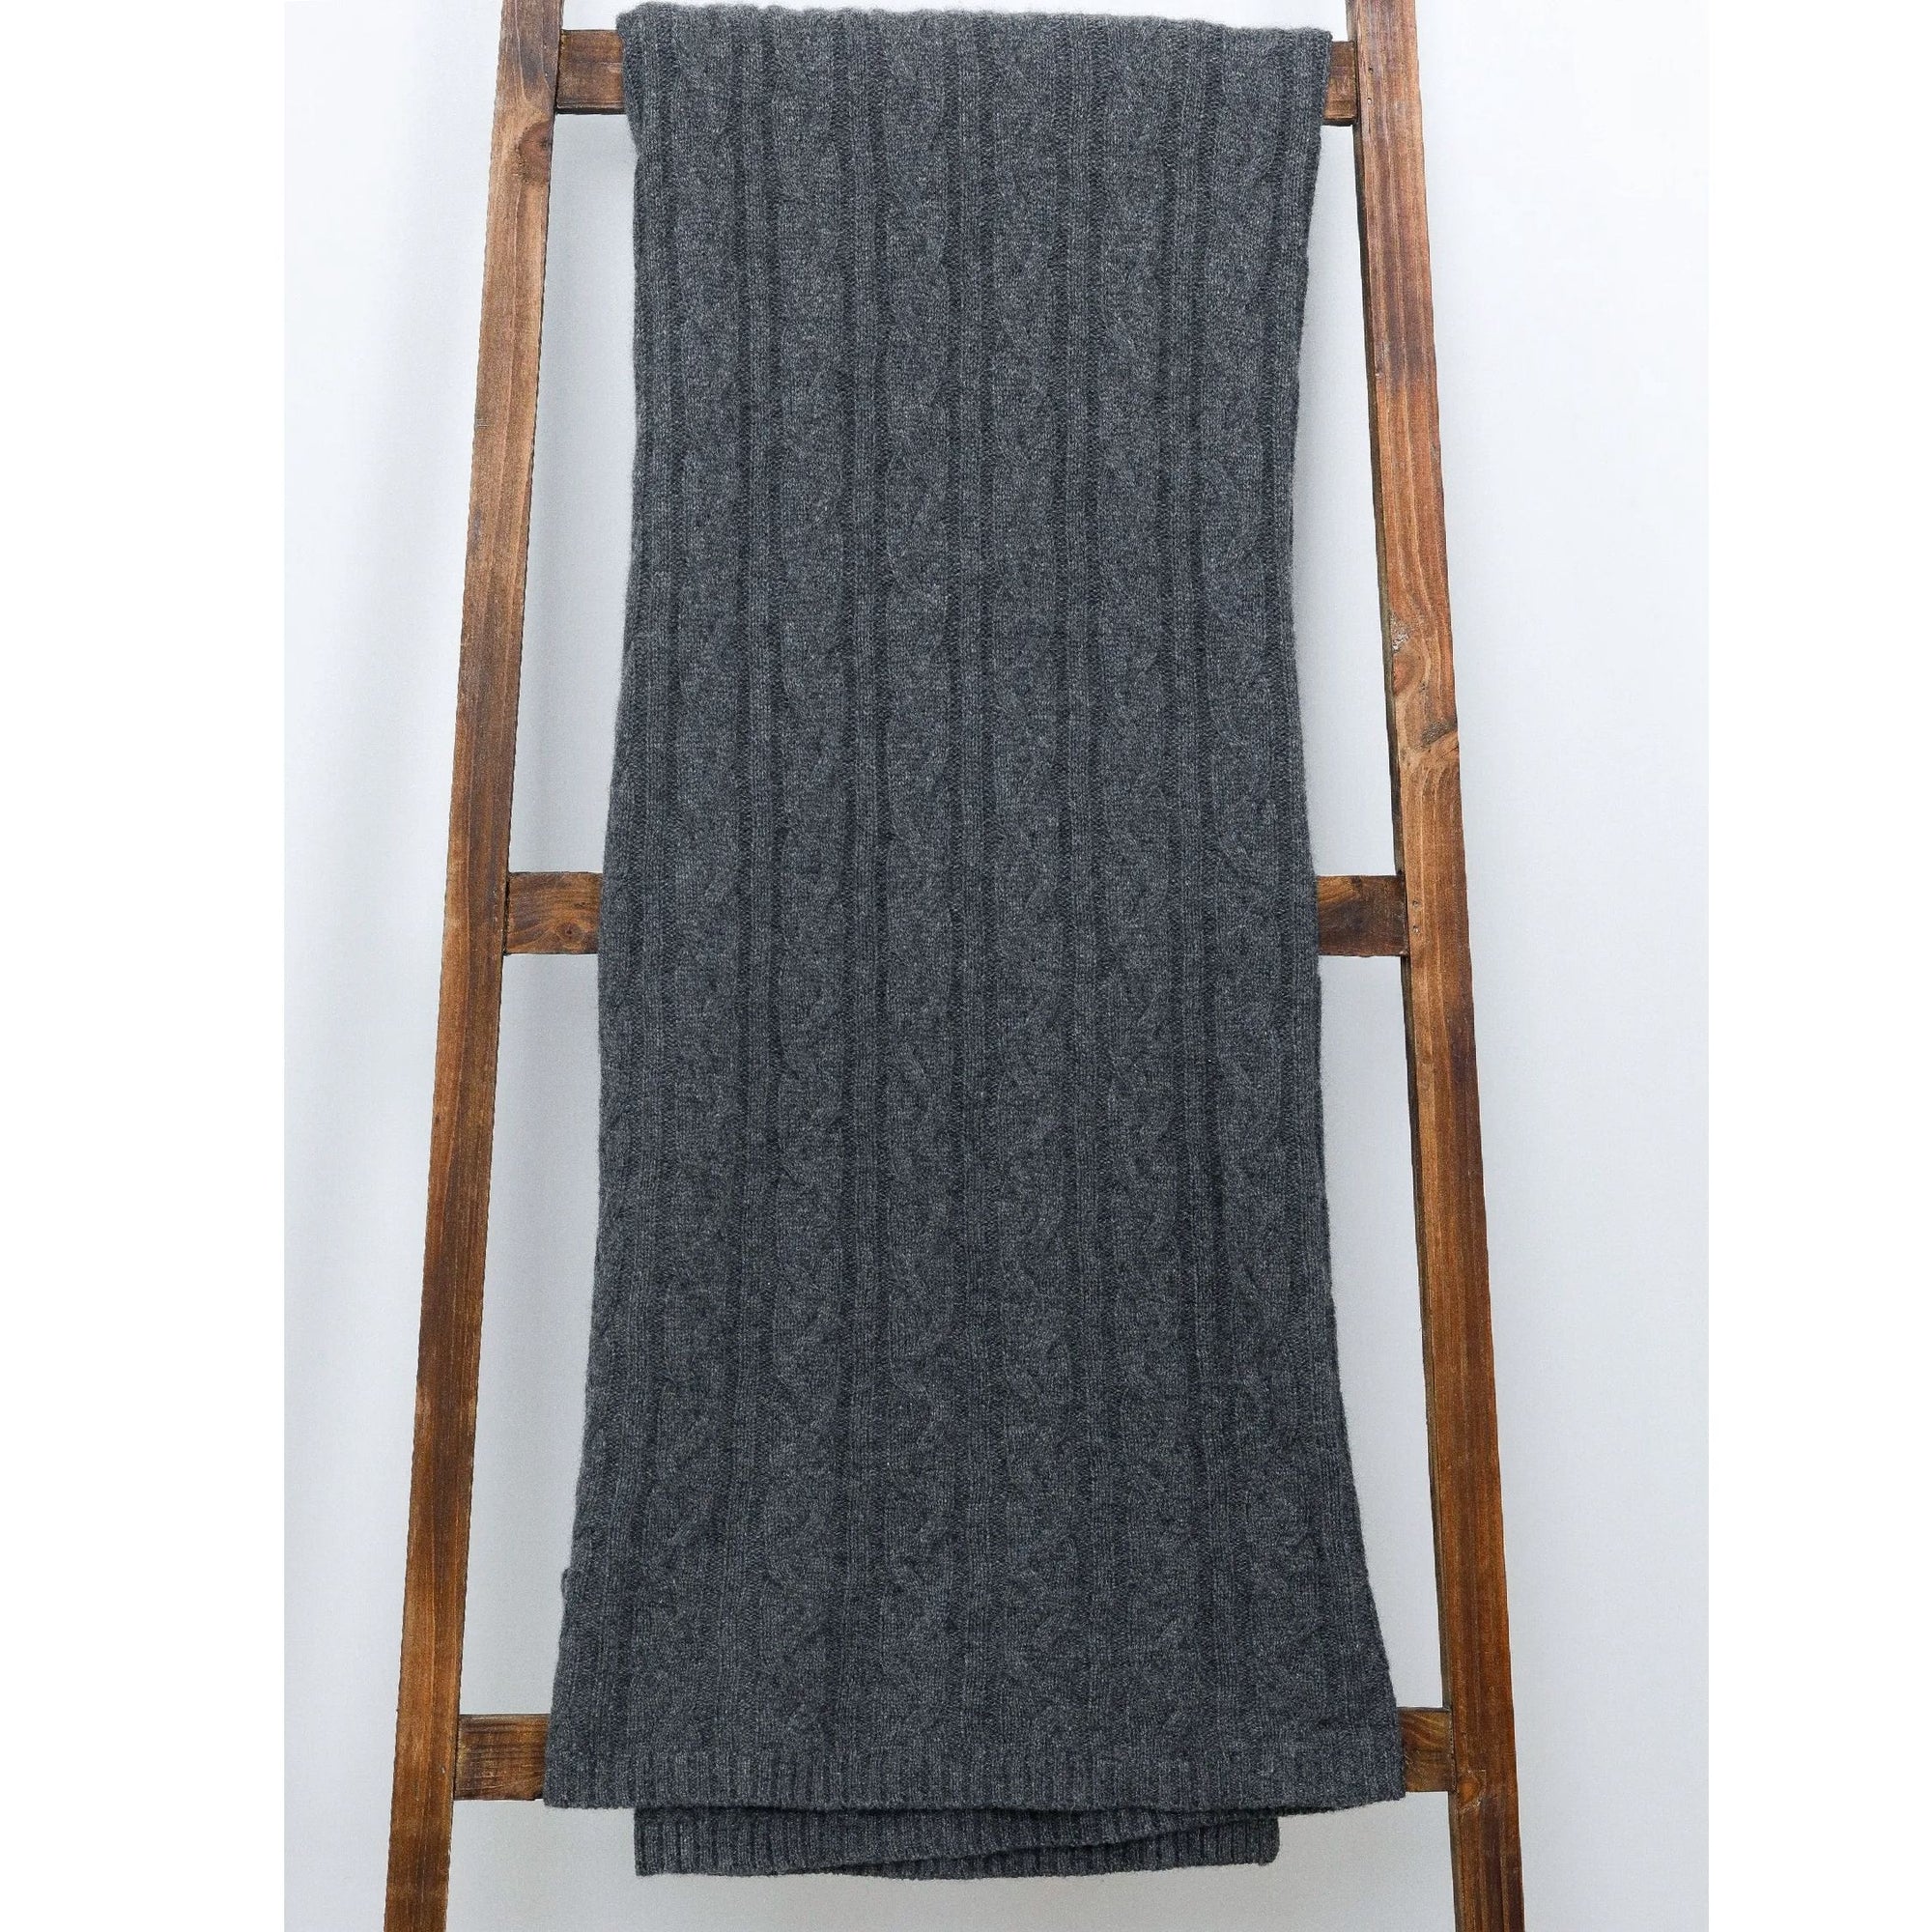 100% Cashmere Cozy Cable Throw (Choice of Colors) by Alashan Cashmere